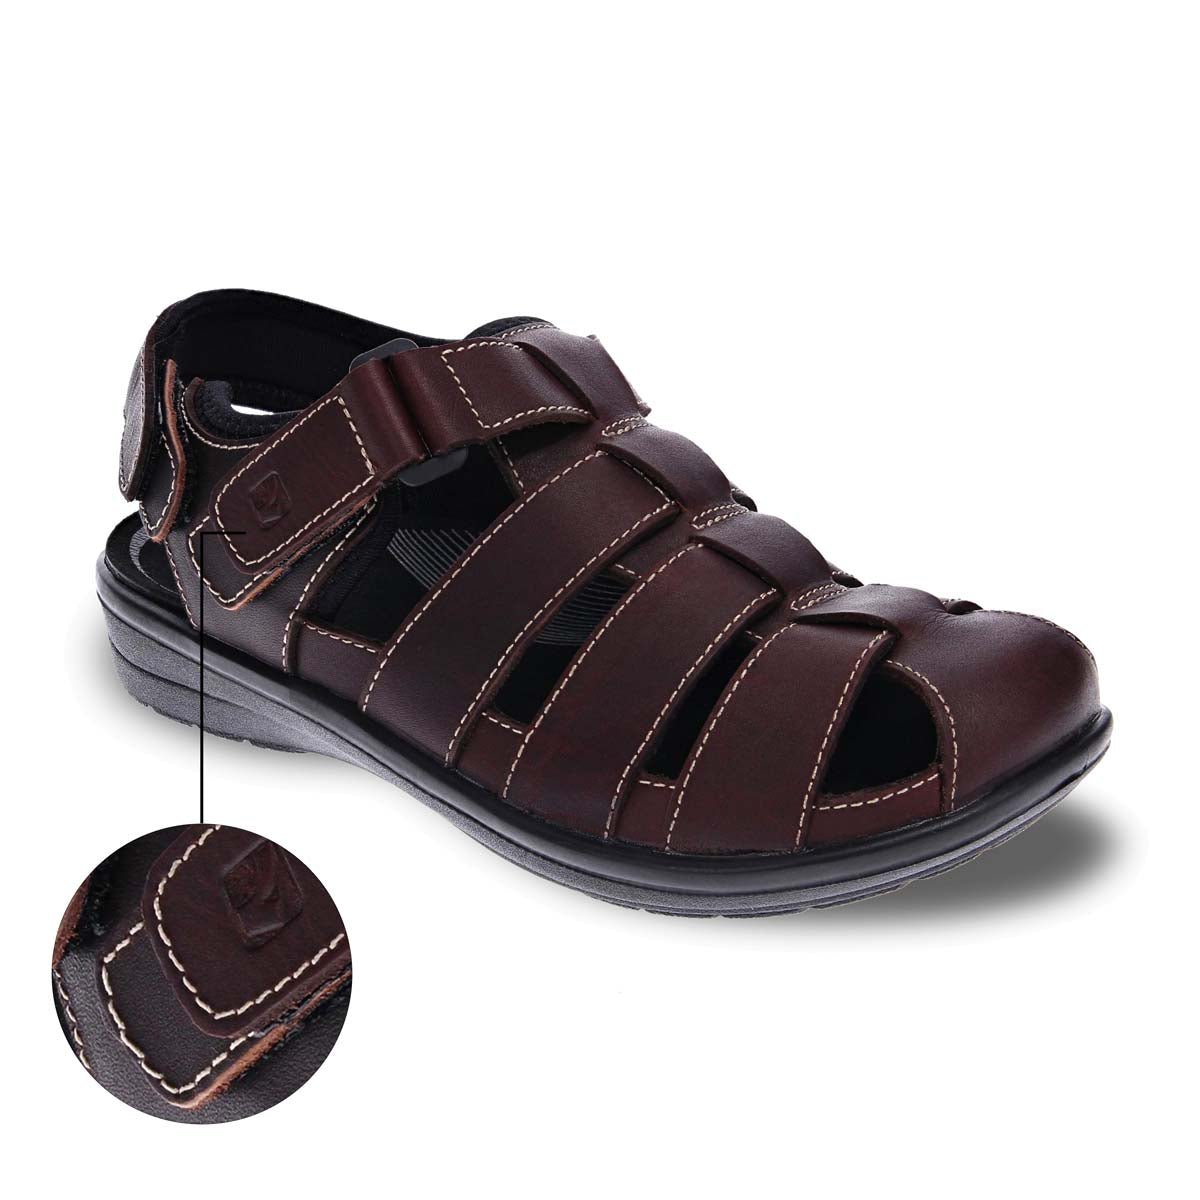 REVERE AMSTERDAM MEN SANDALS IN WHISKEY - TLW Shoes